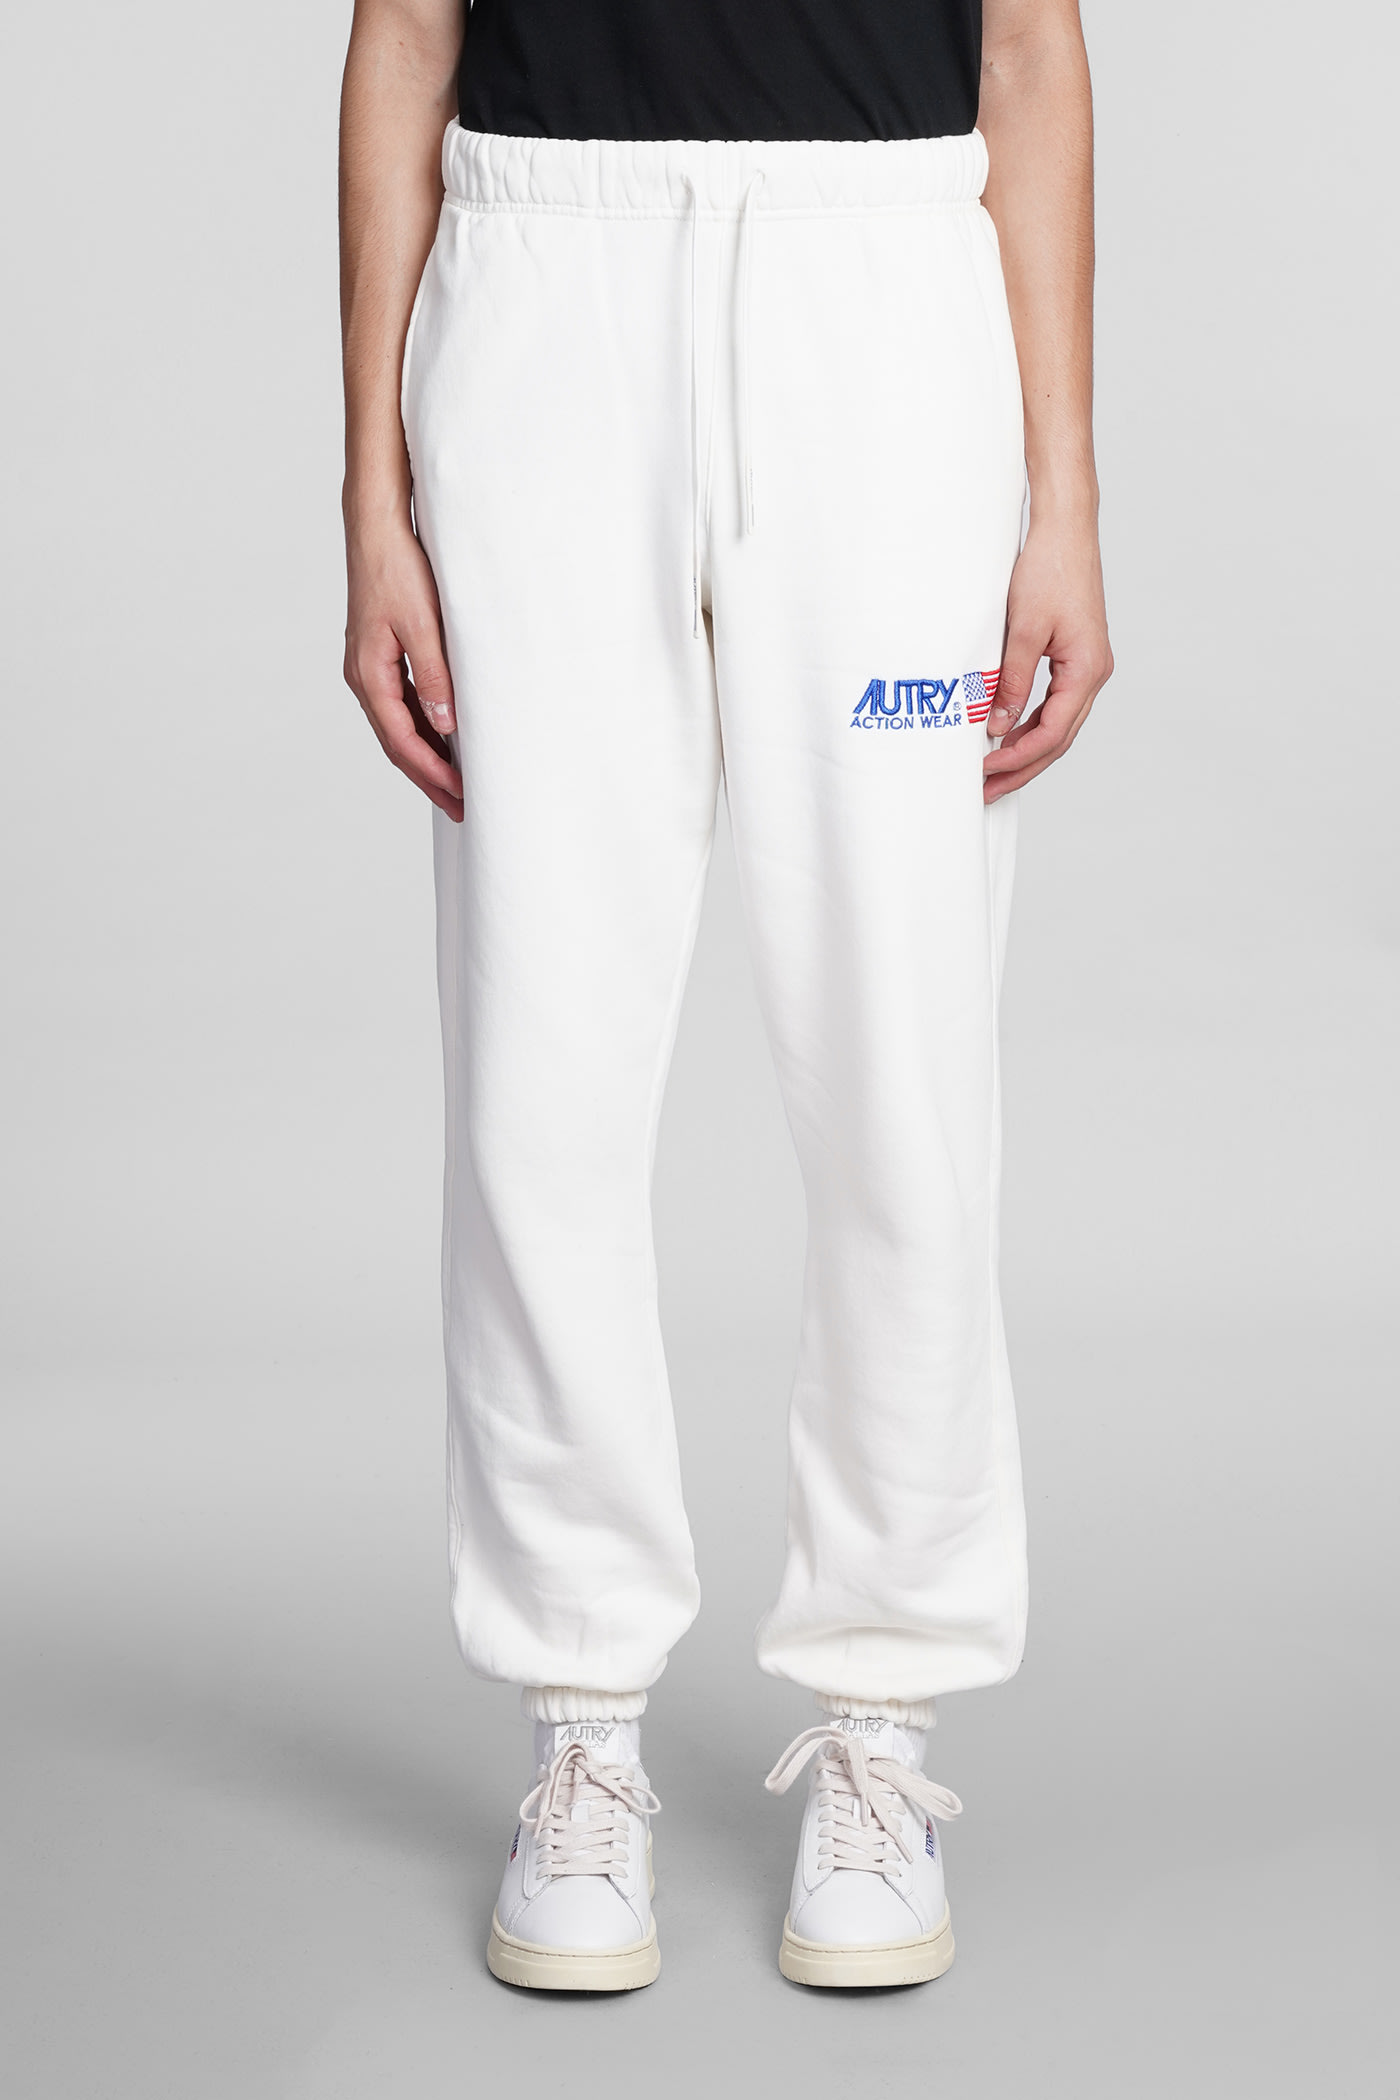 Autry Pants In White Cotton